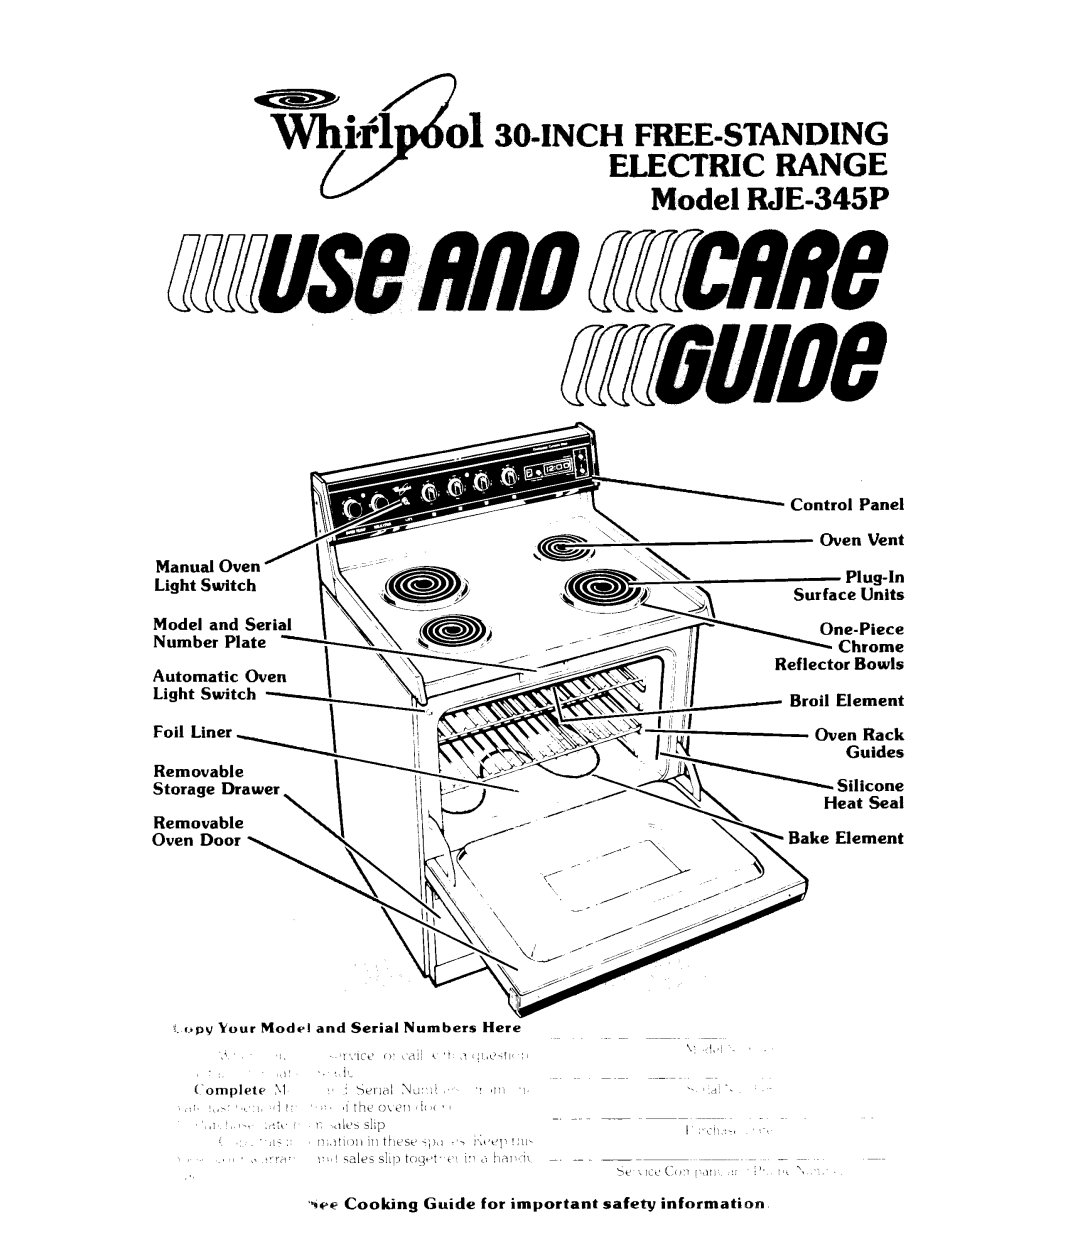 Whirlpool manual FREE-STANDINGELECTRIC RANGE Model WE-345P, Manual Oven Light Switch, Model and Serial Number Plate 